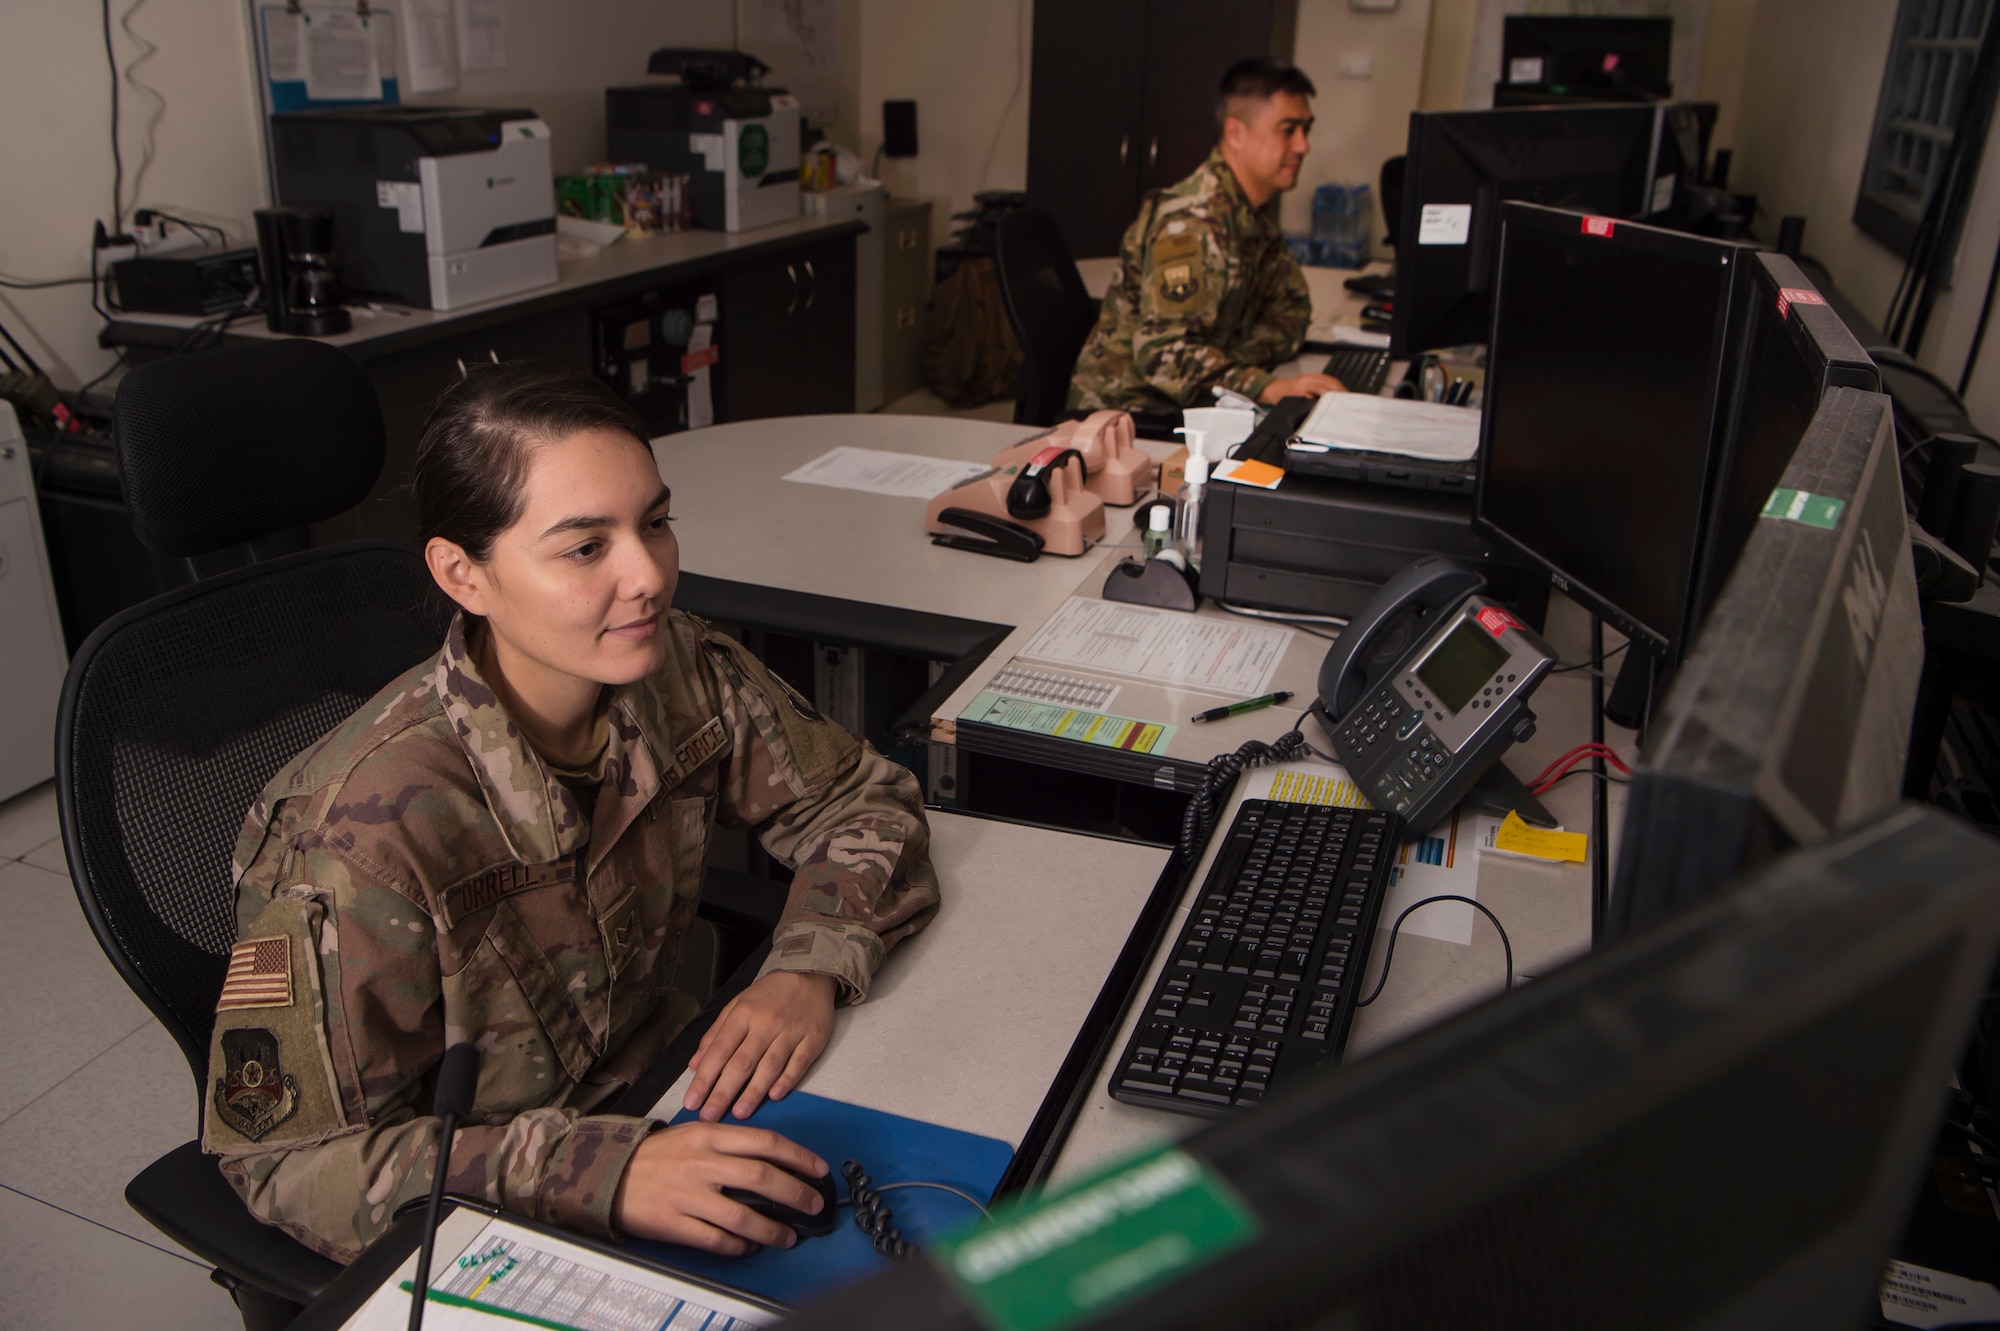 Senior Airman Anelle Orrell, 379th Air Expeditionary Wing (AEW) command post controller, gathers installation information March 18, 2019, at Al Udeid Air Base, Qatar. Airmen from the command post are responsible for gathering and relaying information to entities across base to include aircraft maintenance requirements, security forces incidents, and notifications that ensure the safety of Airmen and other assets on base. (U.S. Air Force photo by Tech. Sgt. Christopher Hubenthal)